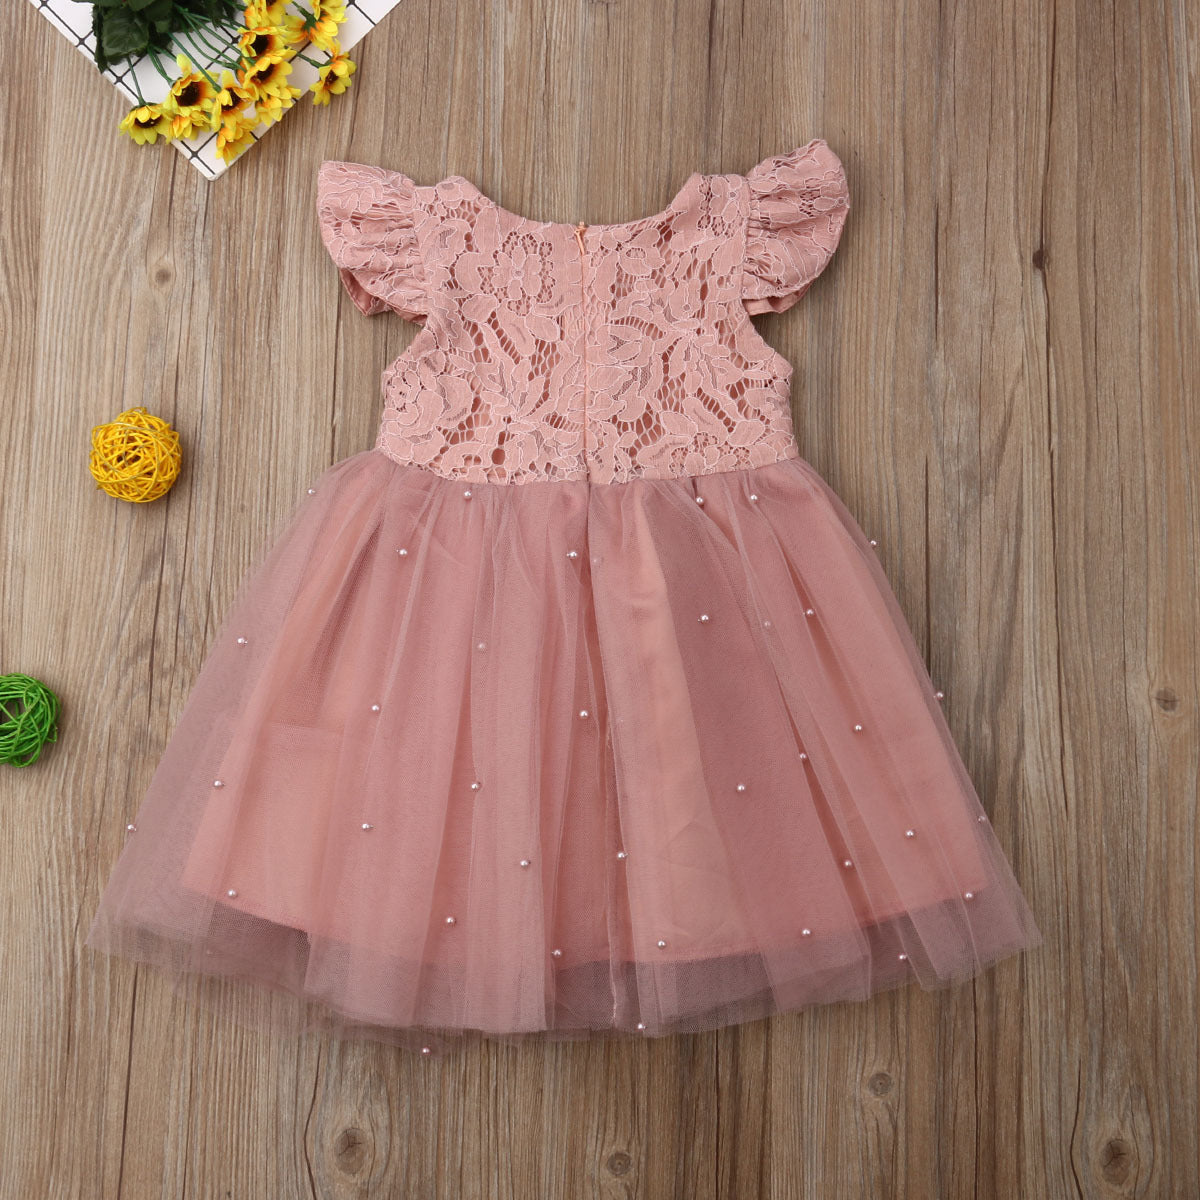 Girl's Pink Mesh Bow & Lace Dress